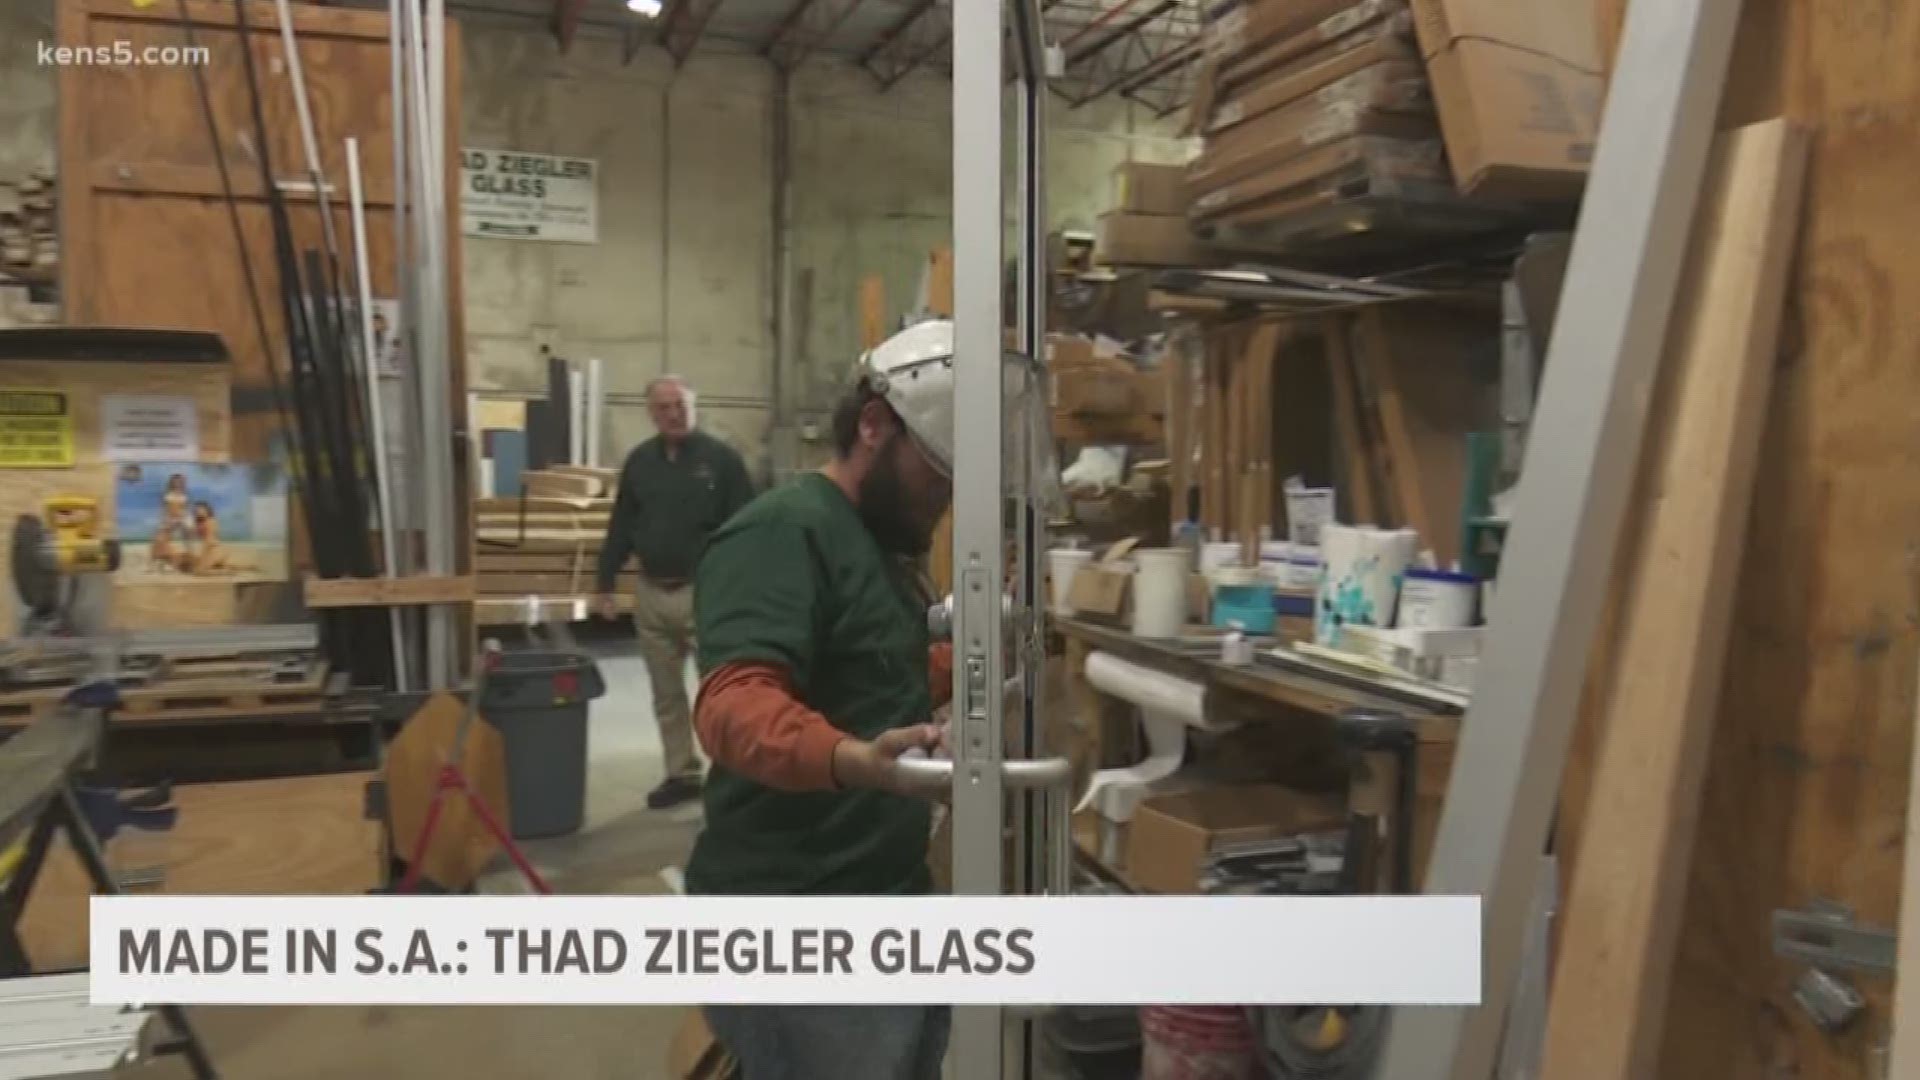 A local glass company that dates back to 1893 is keeping it all in the family.